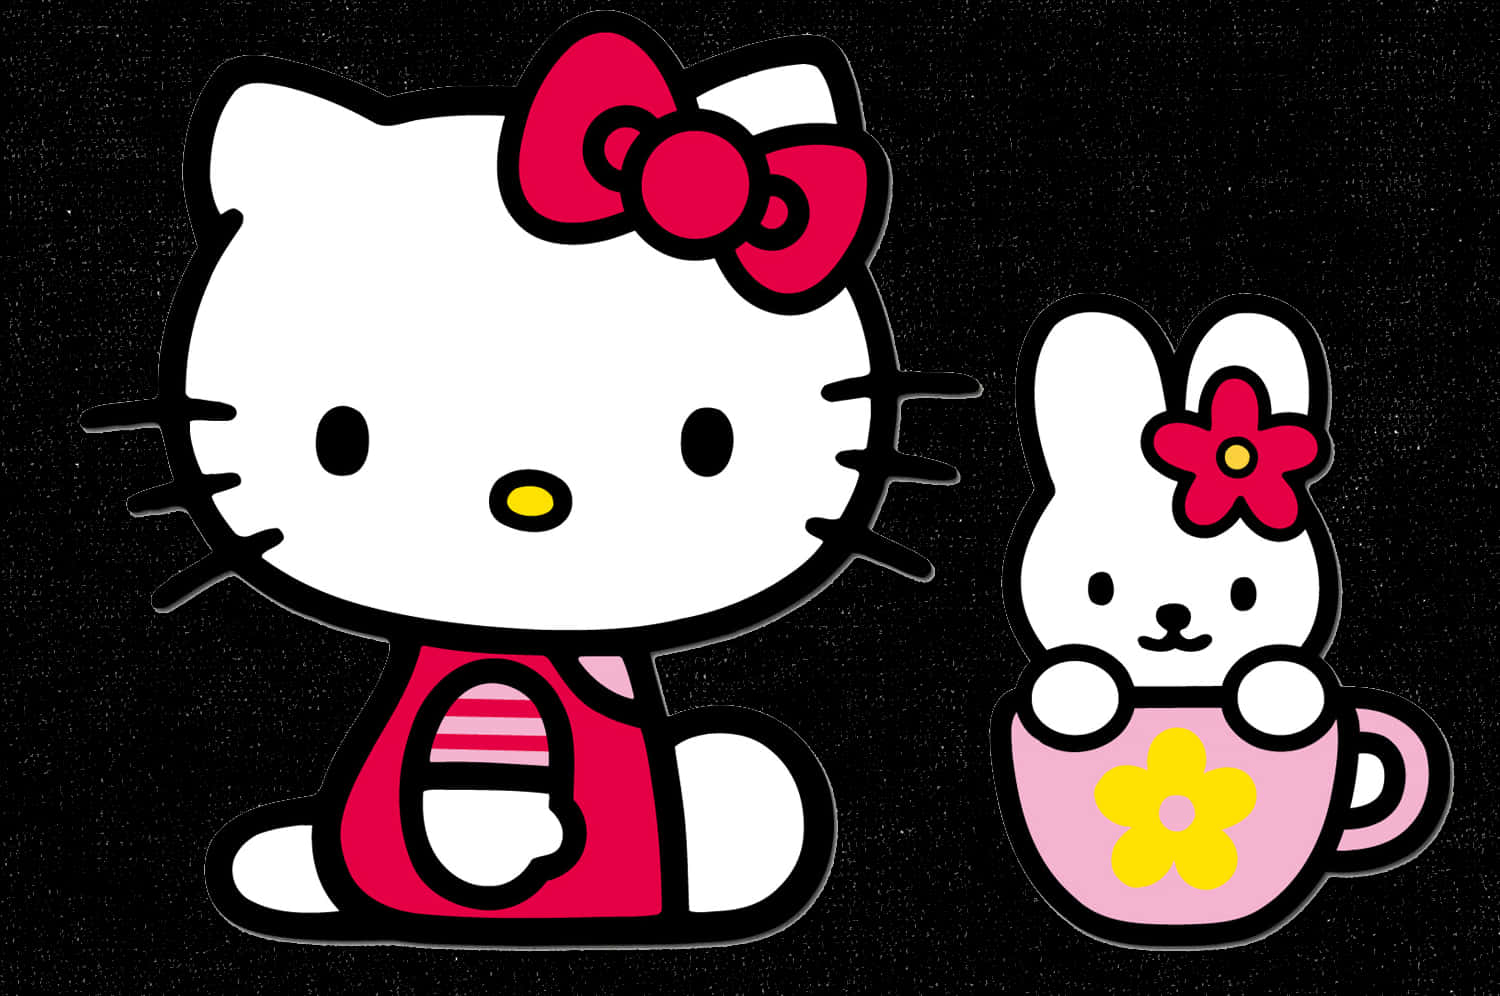 Hello Kittyand Friend Cute Illustration PNG image